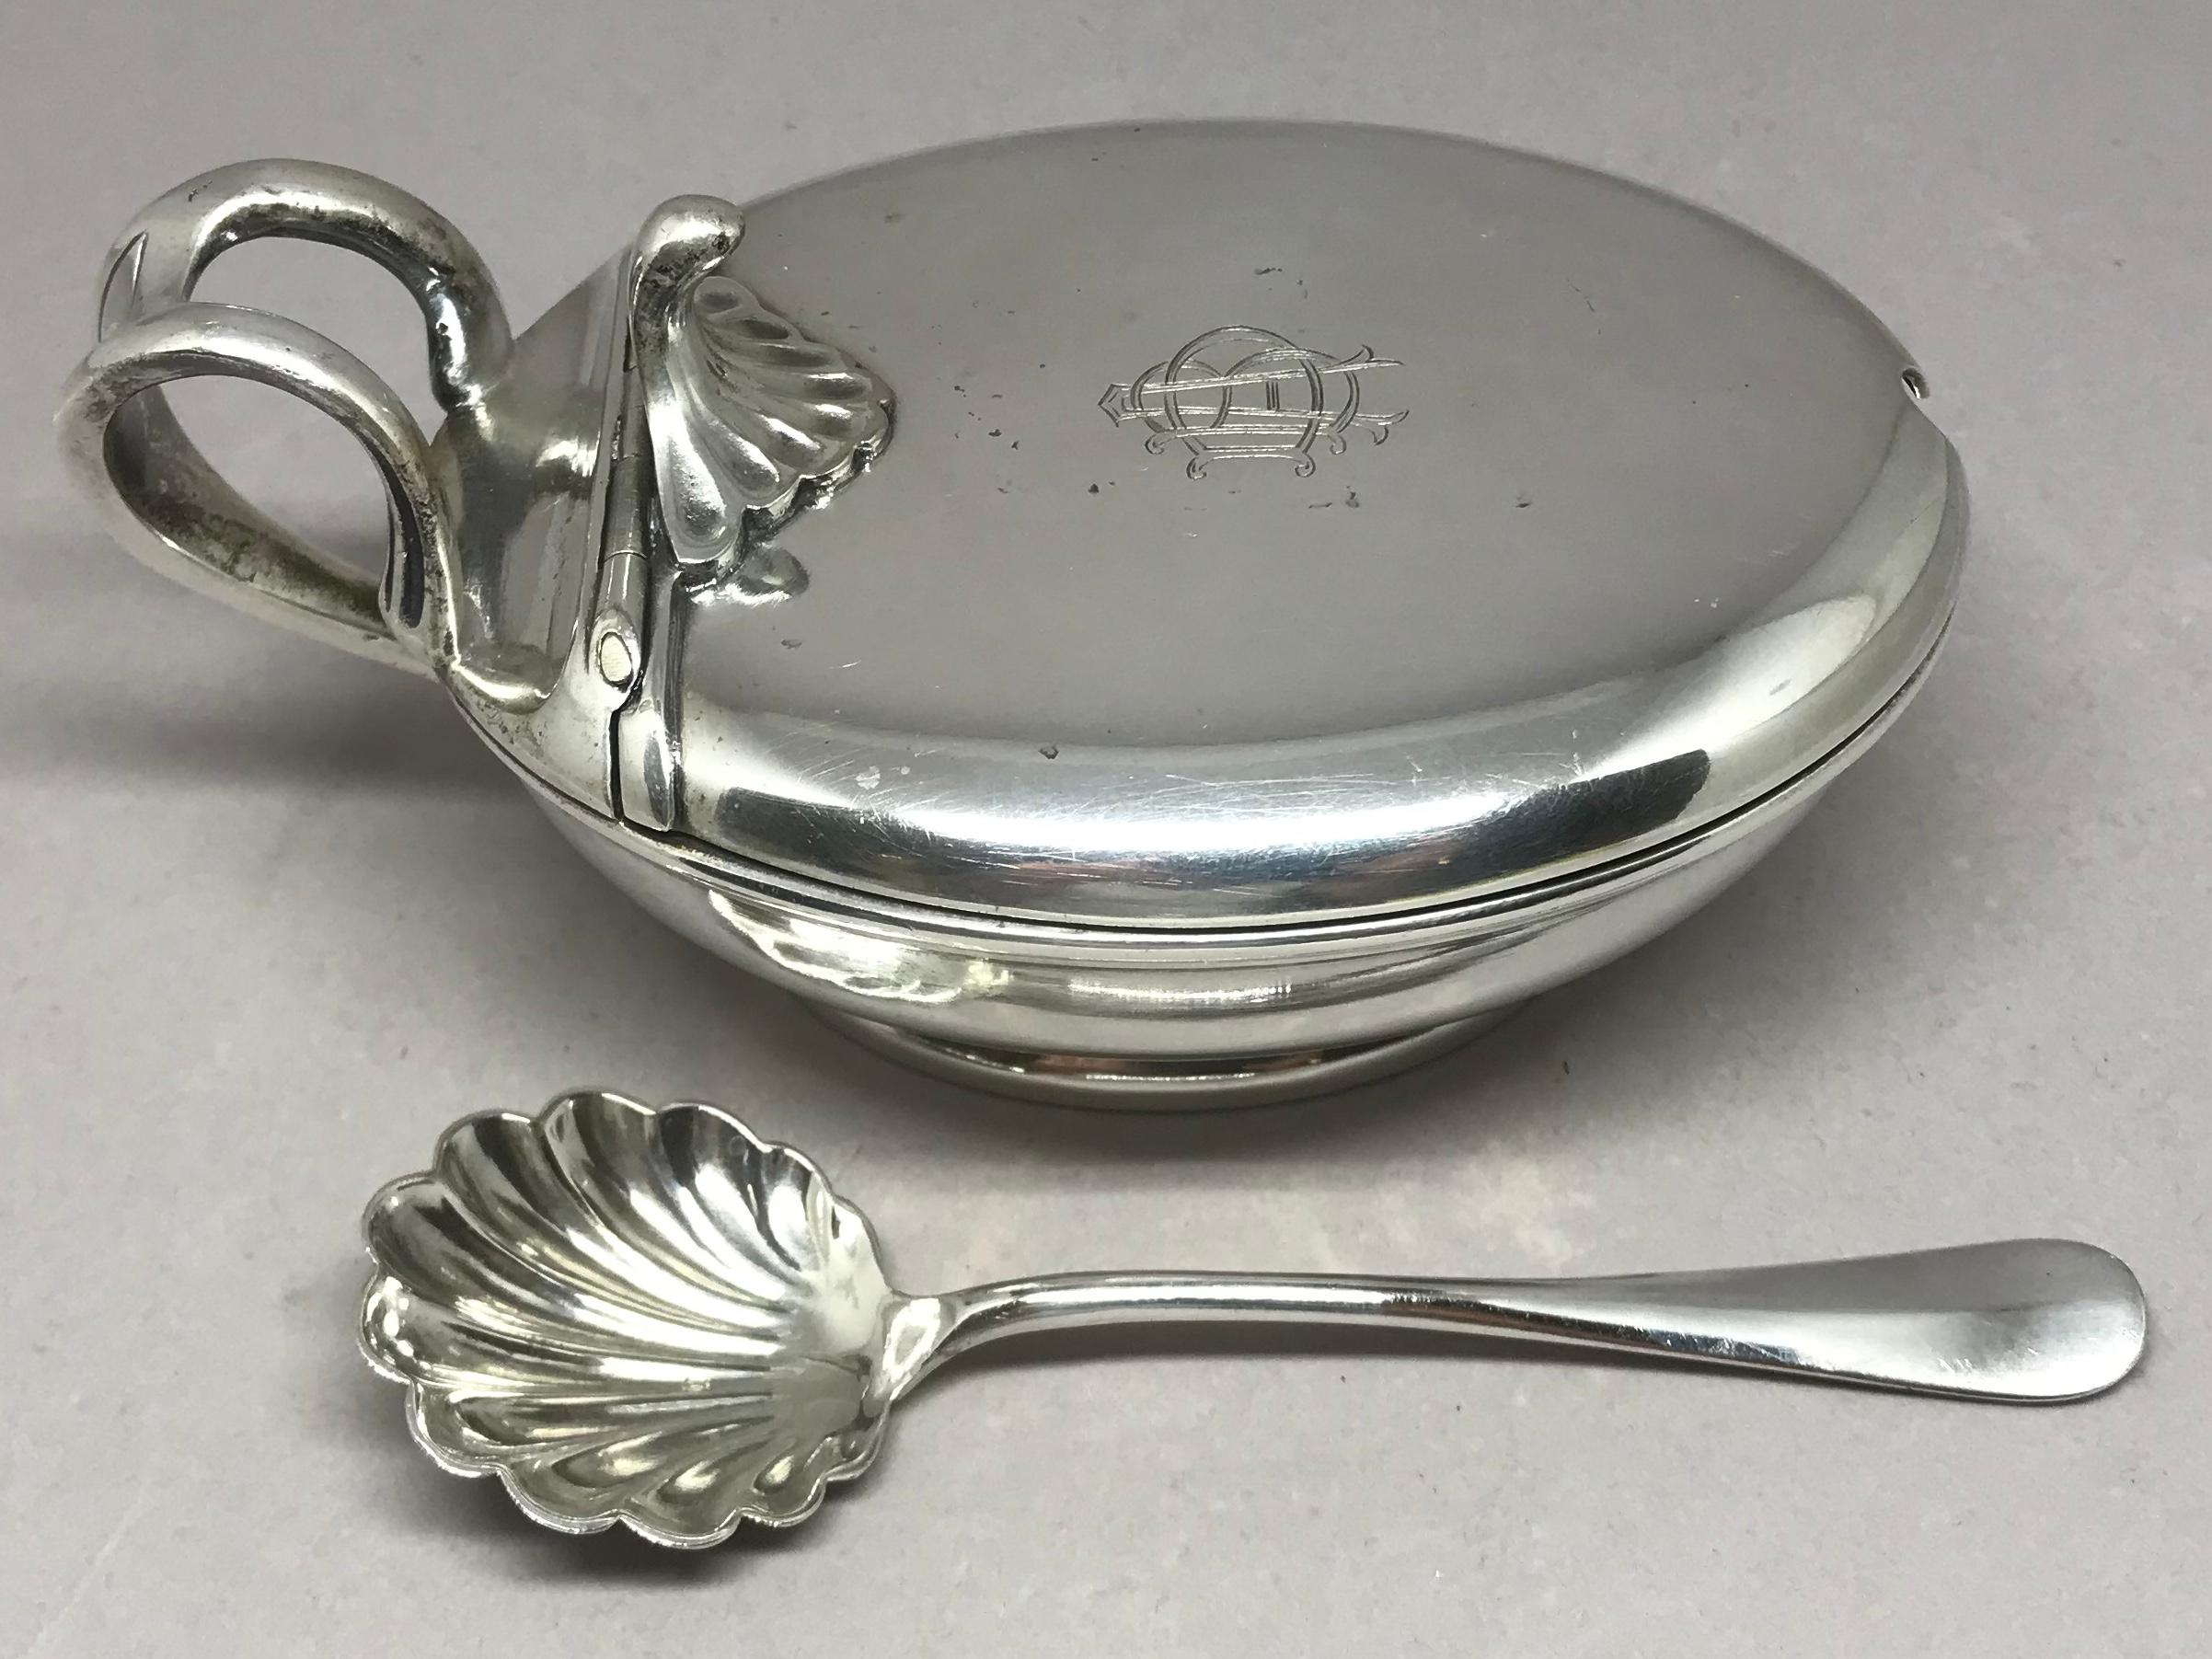 Italian silver condiment dish with spoon. Vintage oval lidded cheese/condiment dish with matching shell-form spoon both monogrammed with A D B. Markings for Broggi, Milano. Italy, midcentury Dimensions: 6.25